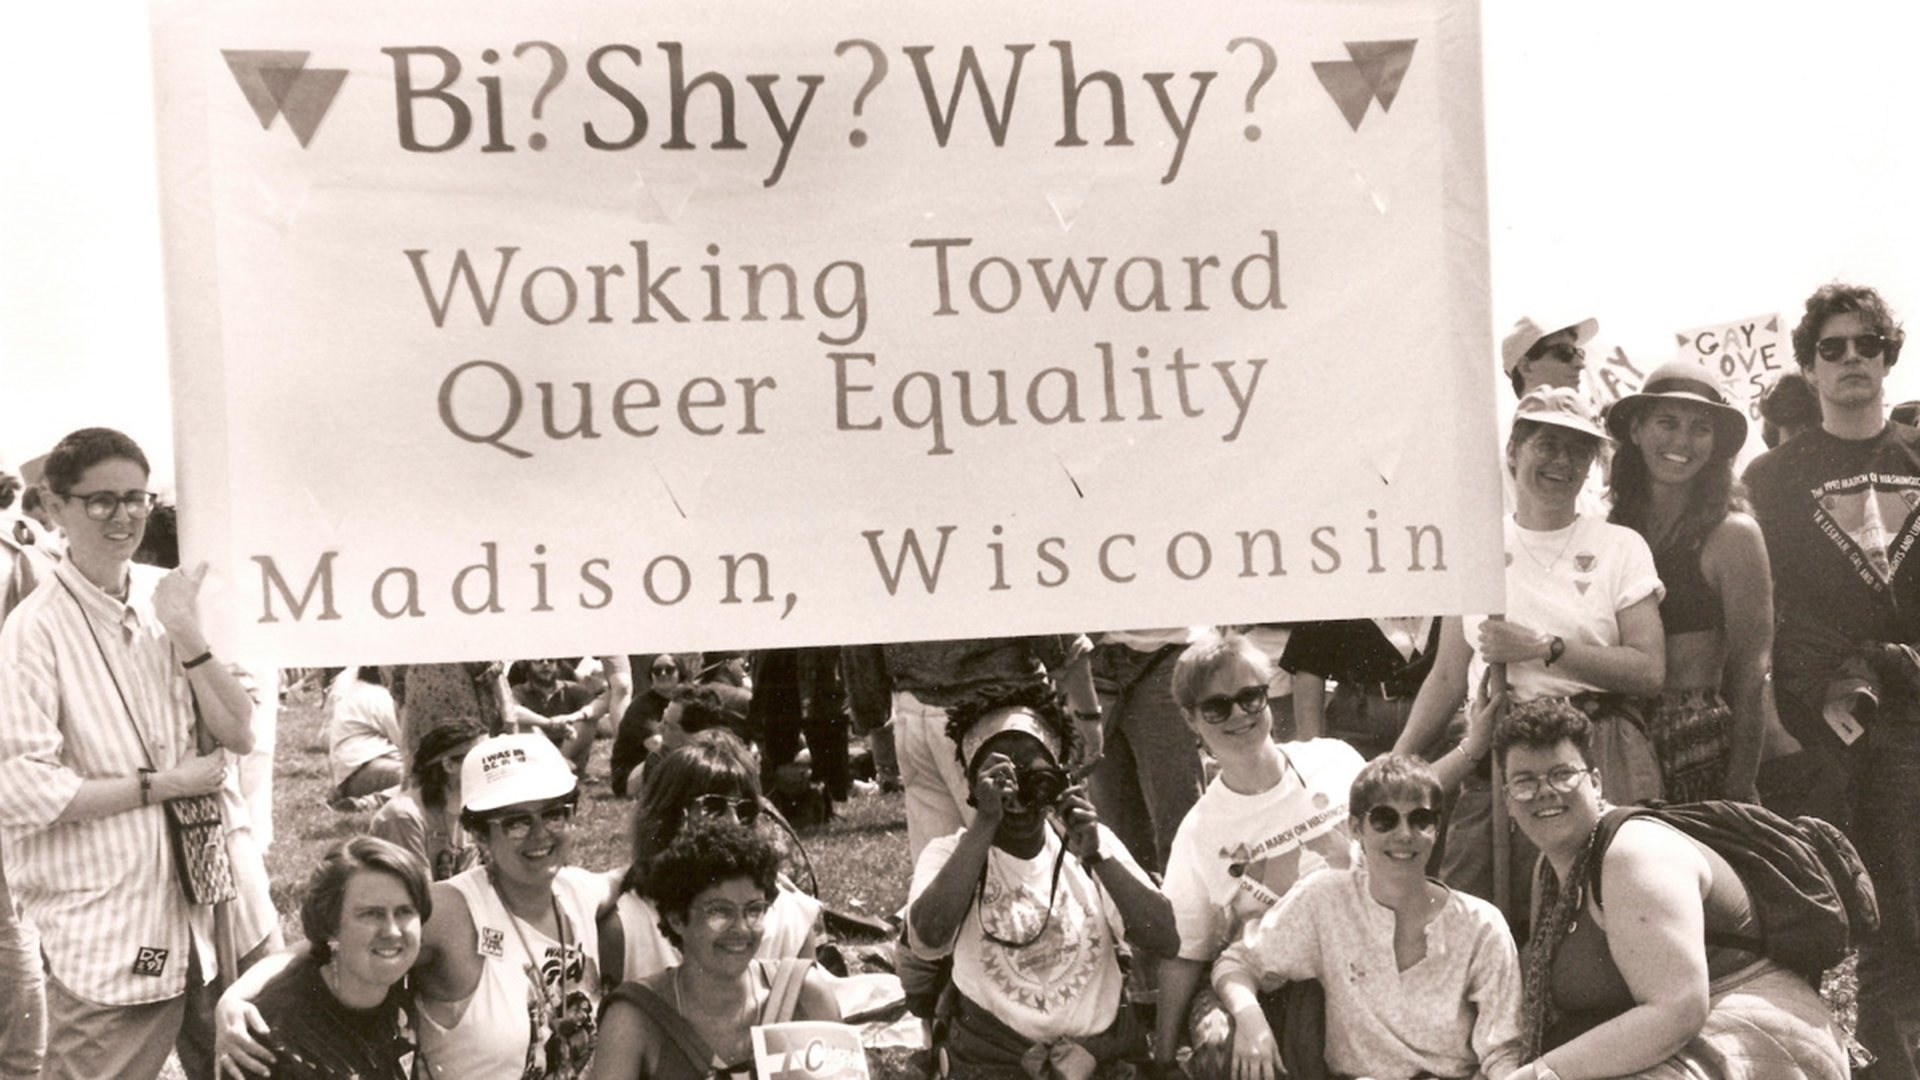 The Madison based bisexual support group active in the 1990s called Bi? Shy? Why? poses outdoors with its organizational banner.